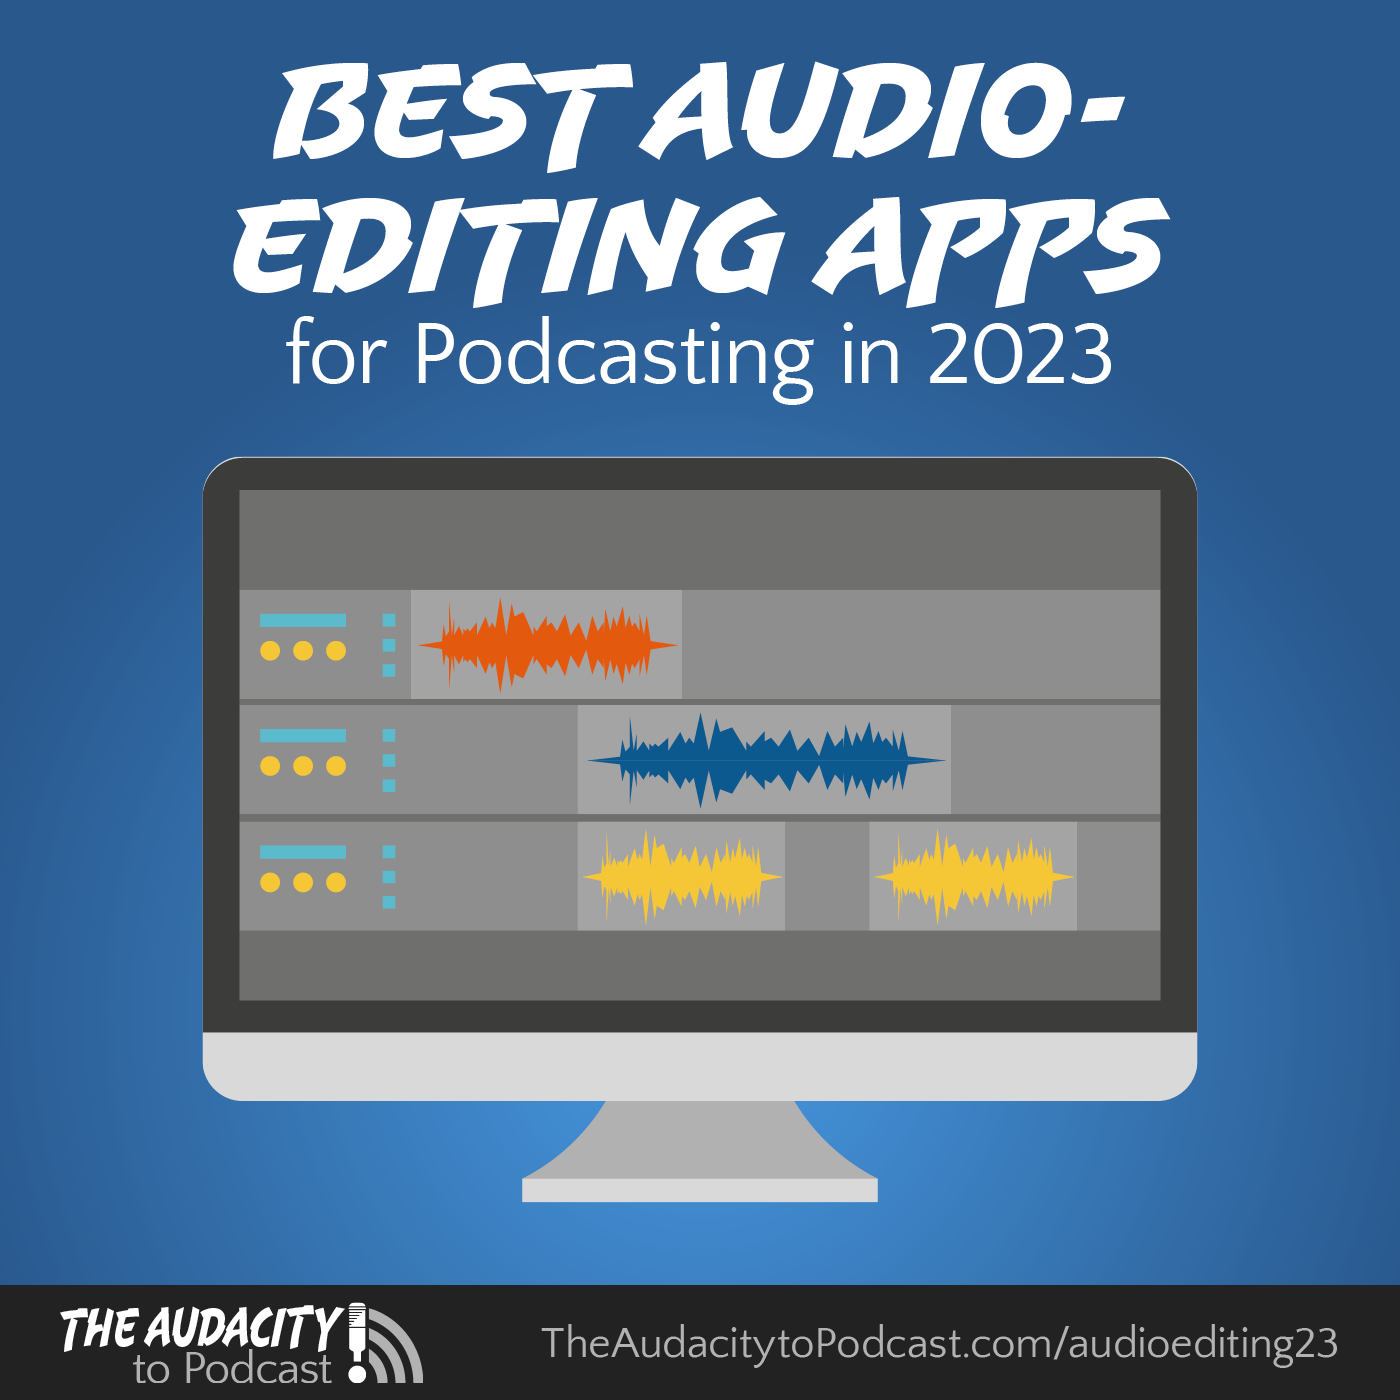 Best Audio-Editing Apps for Podcasting in 2023